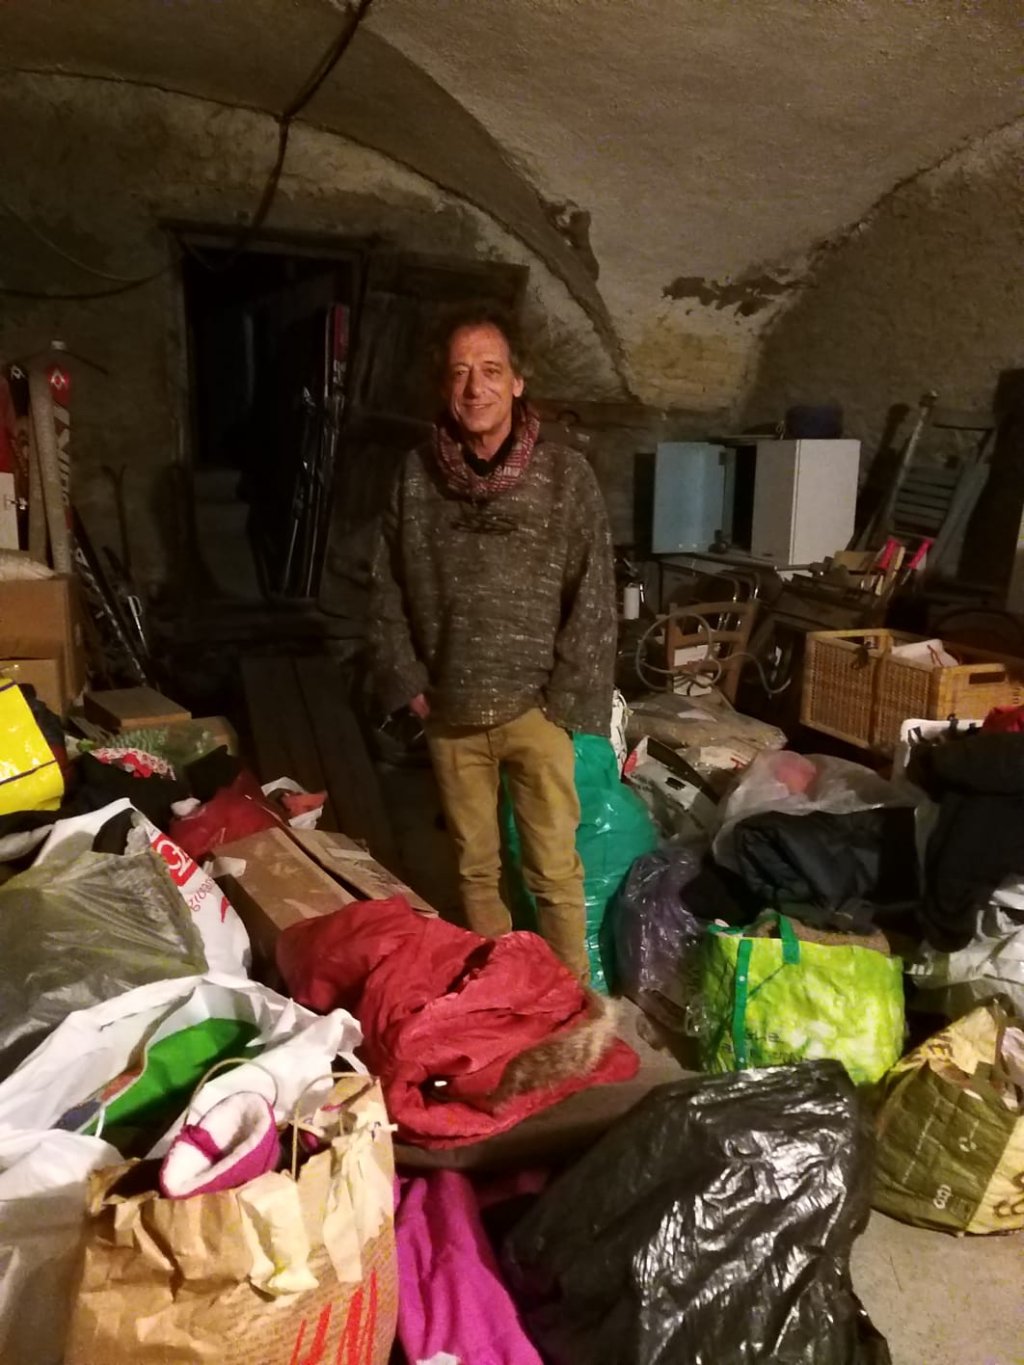 Piero Gorza among donations for migrants to try and protect against the cold temperatures high up in the mountains | Photo: Dany Mitzman / InfoMigrants